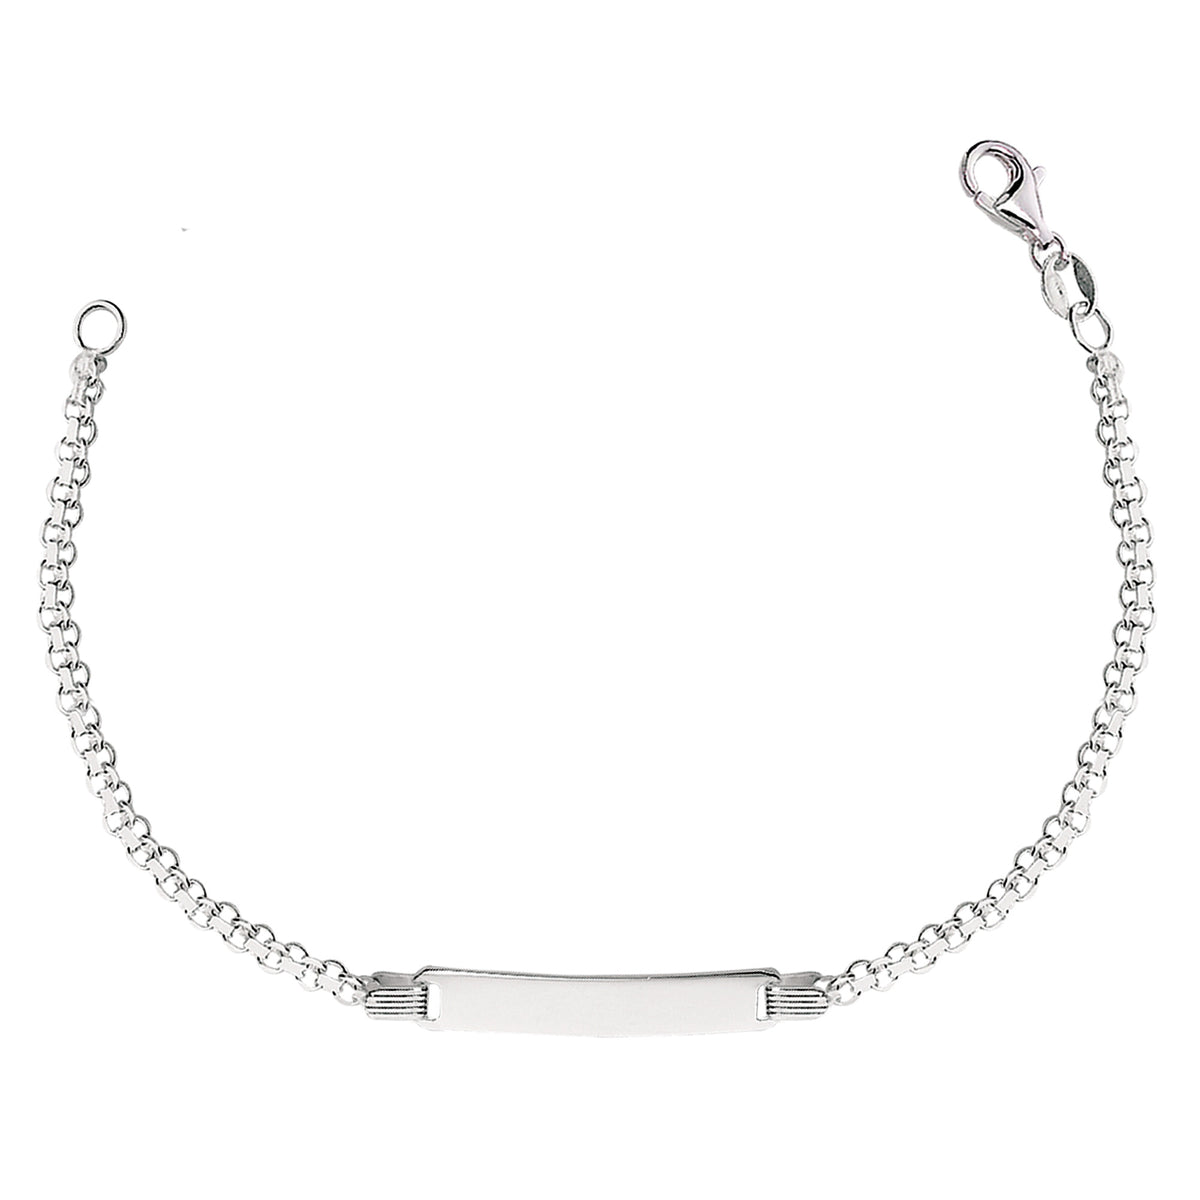 Bismark Chain Baby Id Bracelet In Sterling Silver - 6 Inches fine designer jewelry for men and women